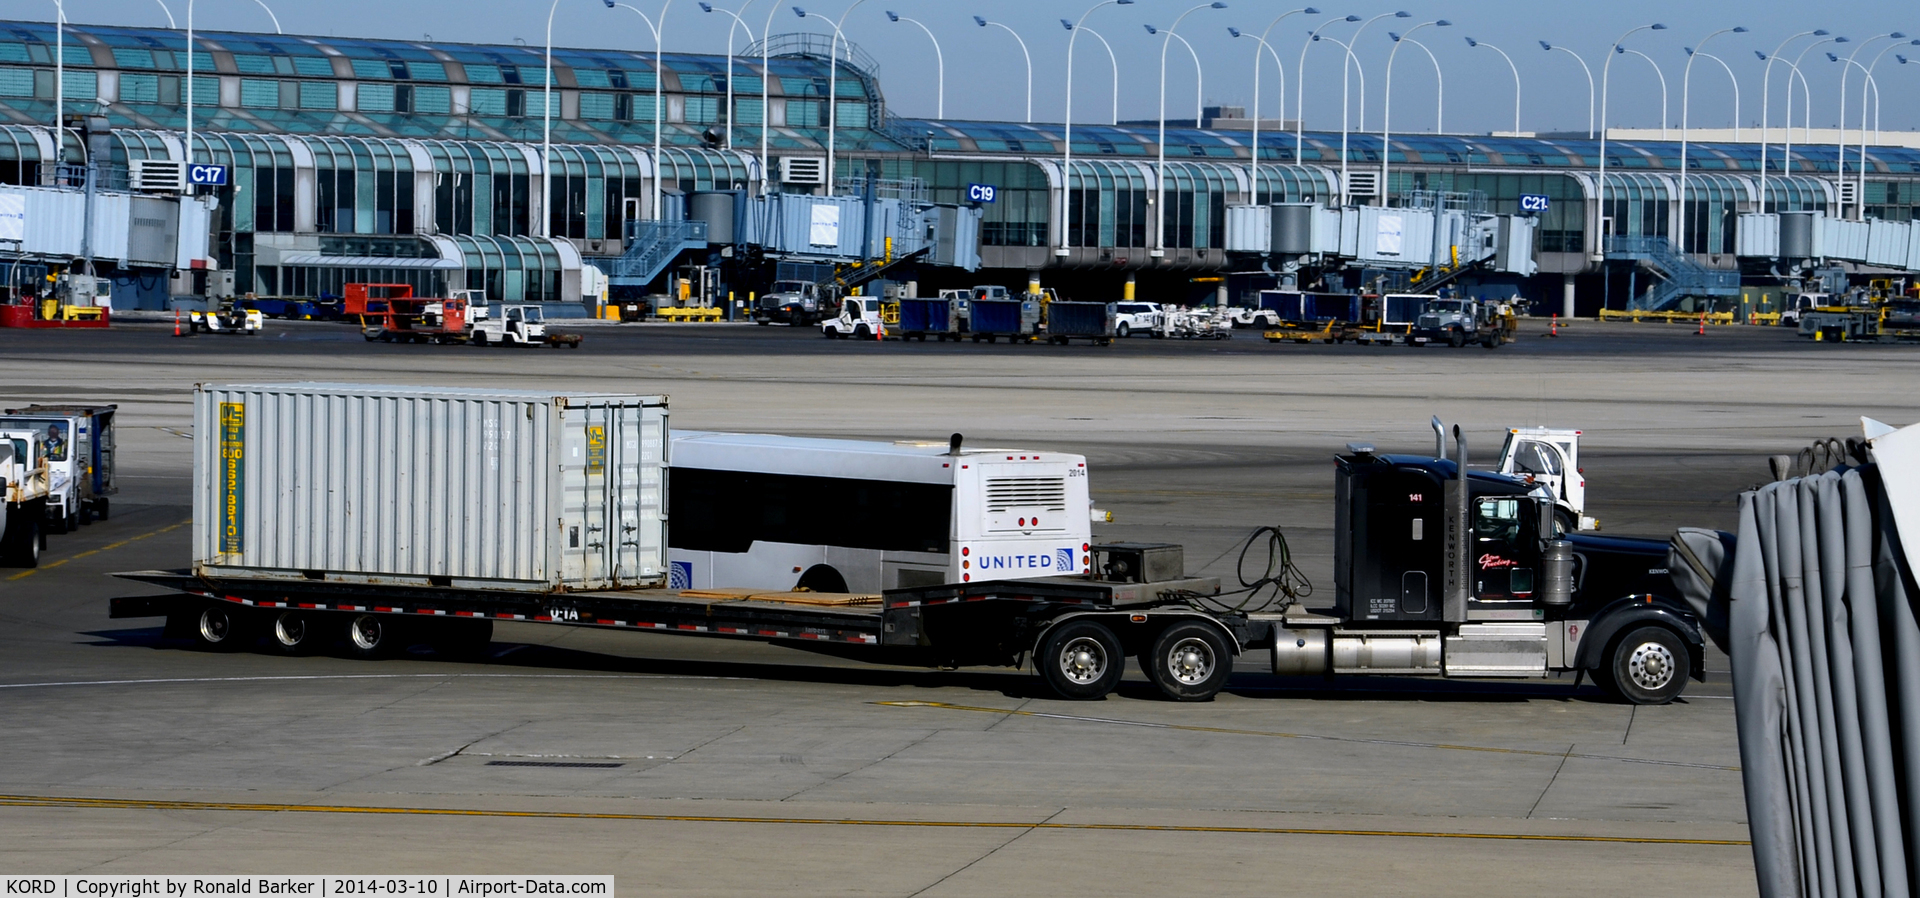 Chicago O'hare International Airport (ORD) - Truck on the ramp at O'Hare